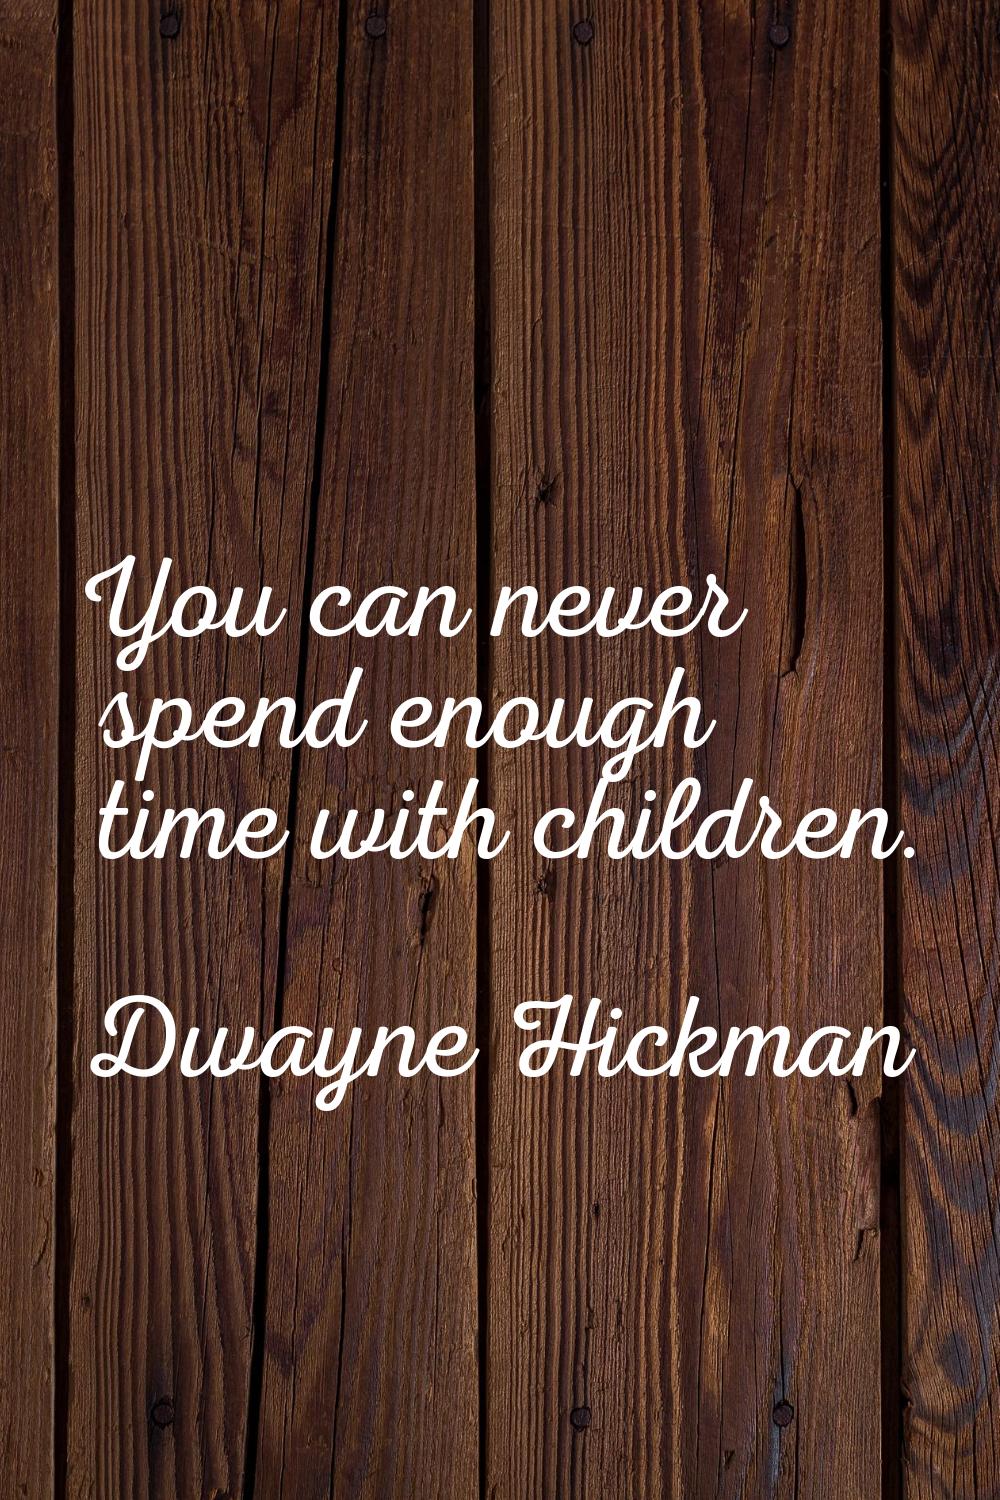 You can never spend enough time with children.